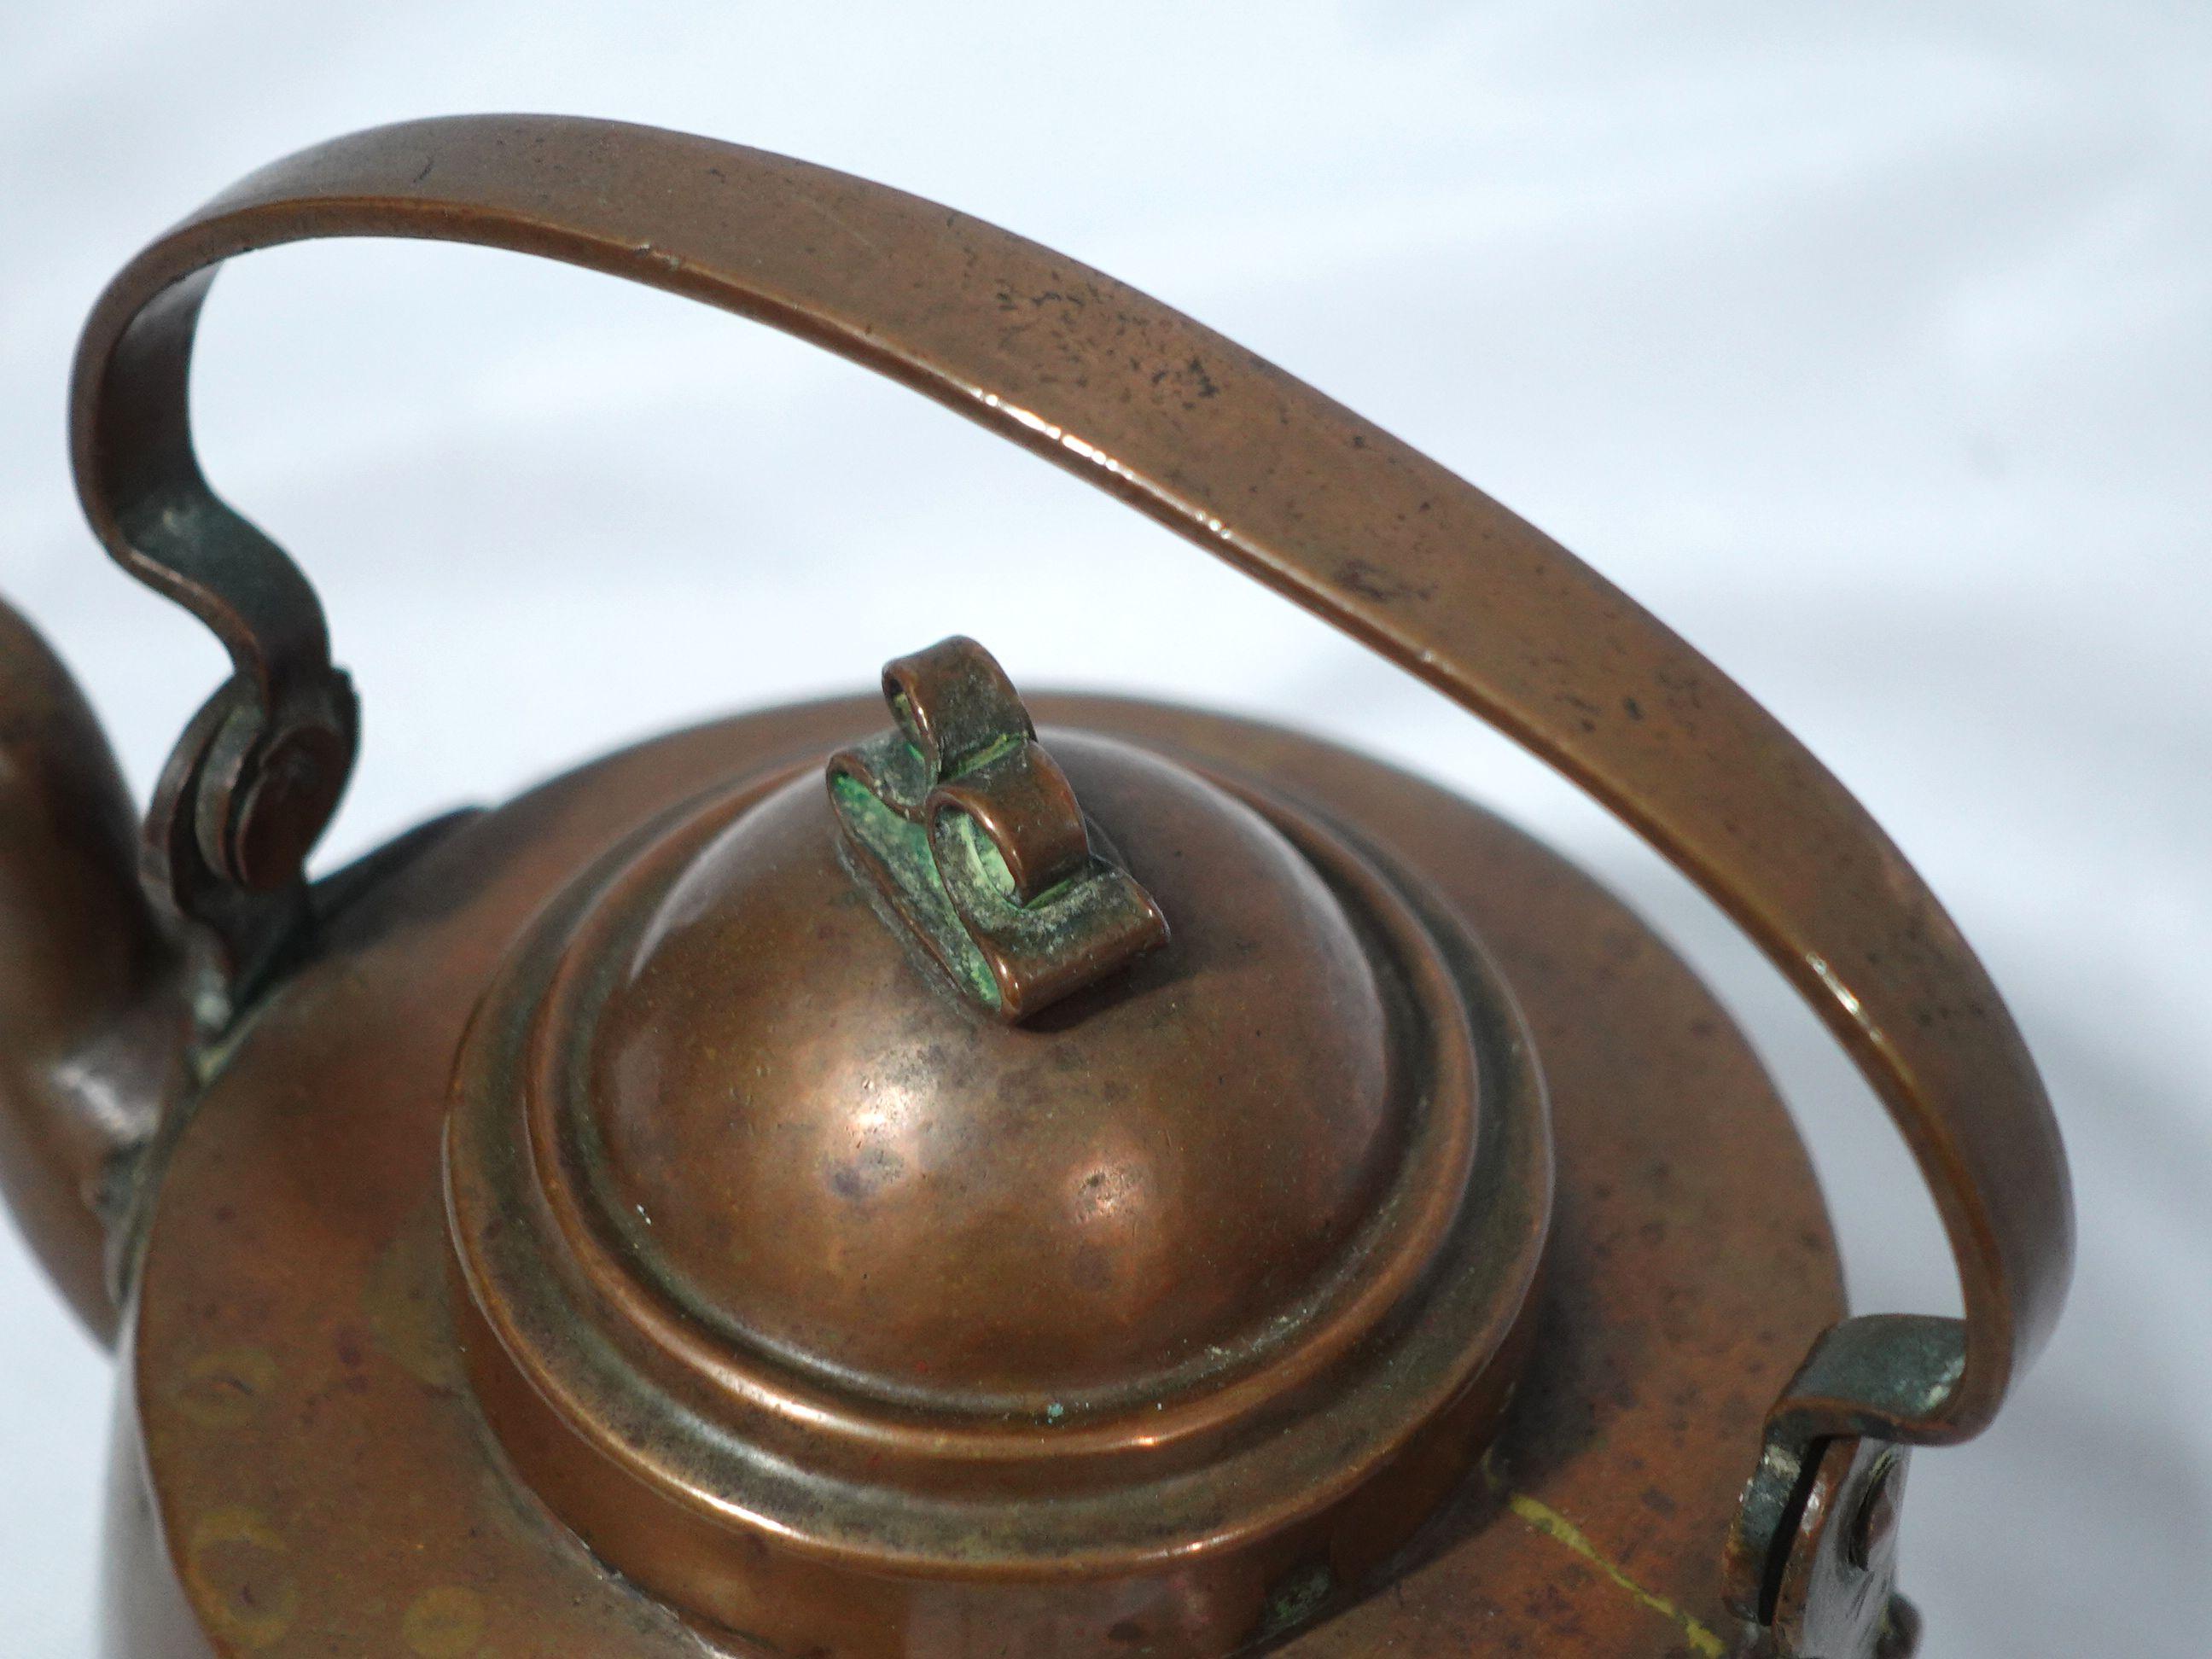 Hand-hammered a heavy copper tea kettle with wood handle made in England from the 19th century, very well hand-made with delicate craftsmanship, and highly collectible antique.
